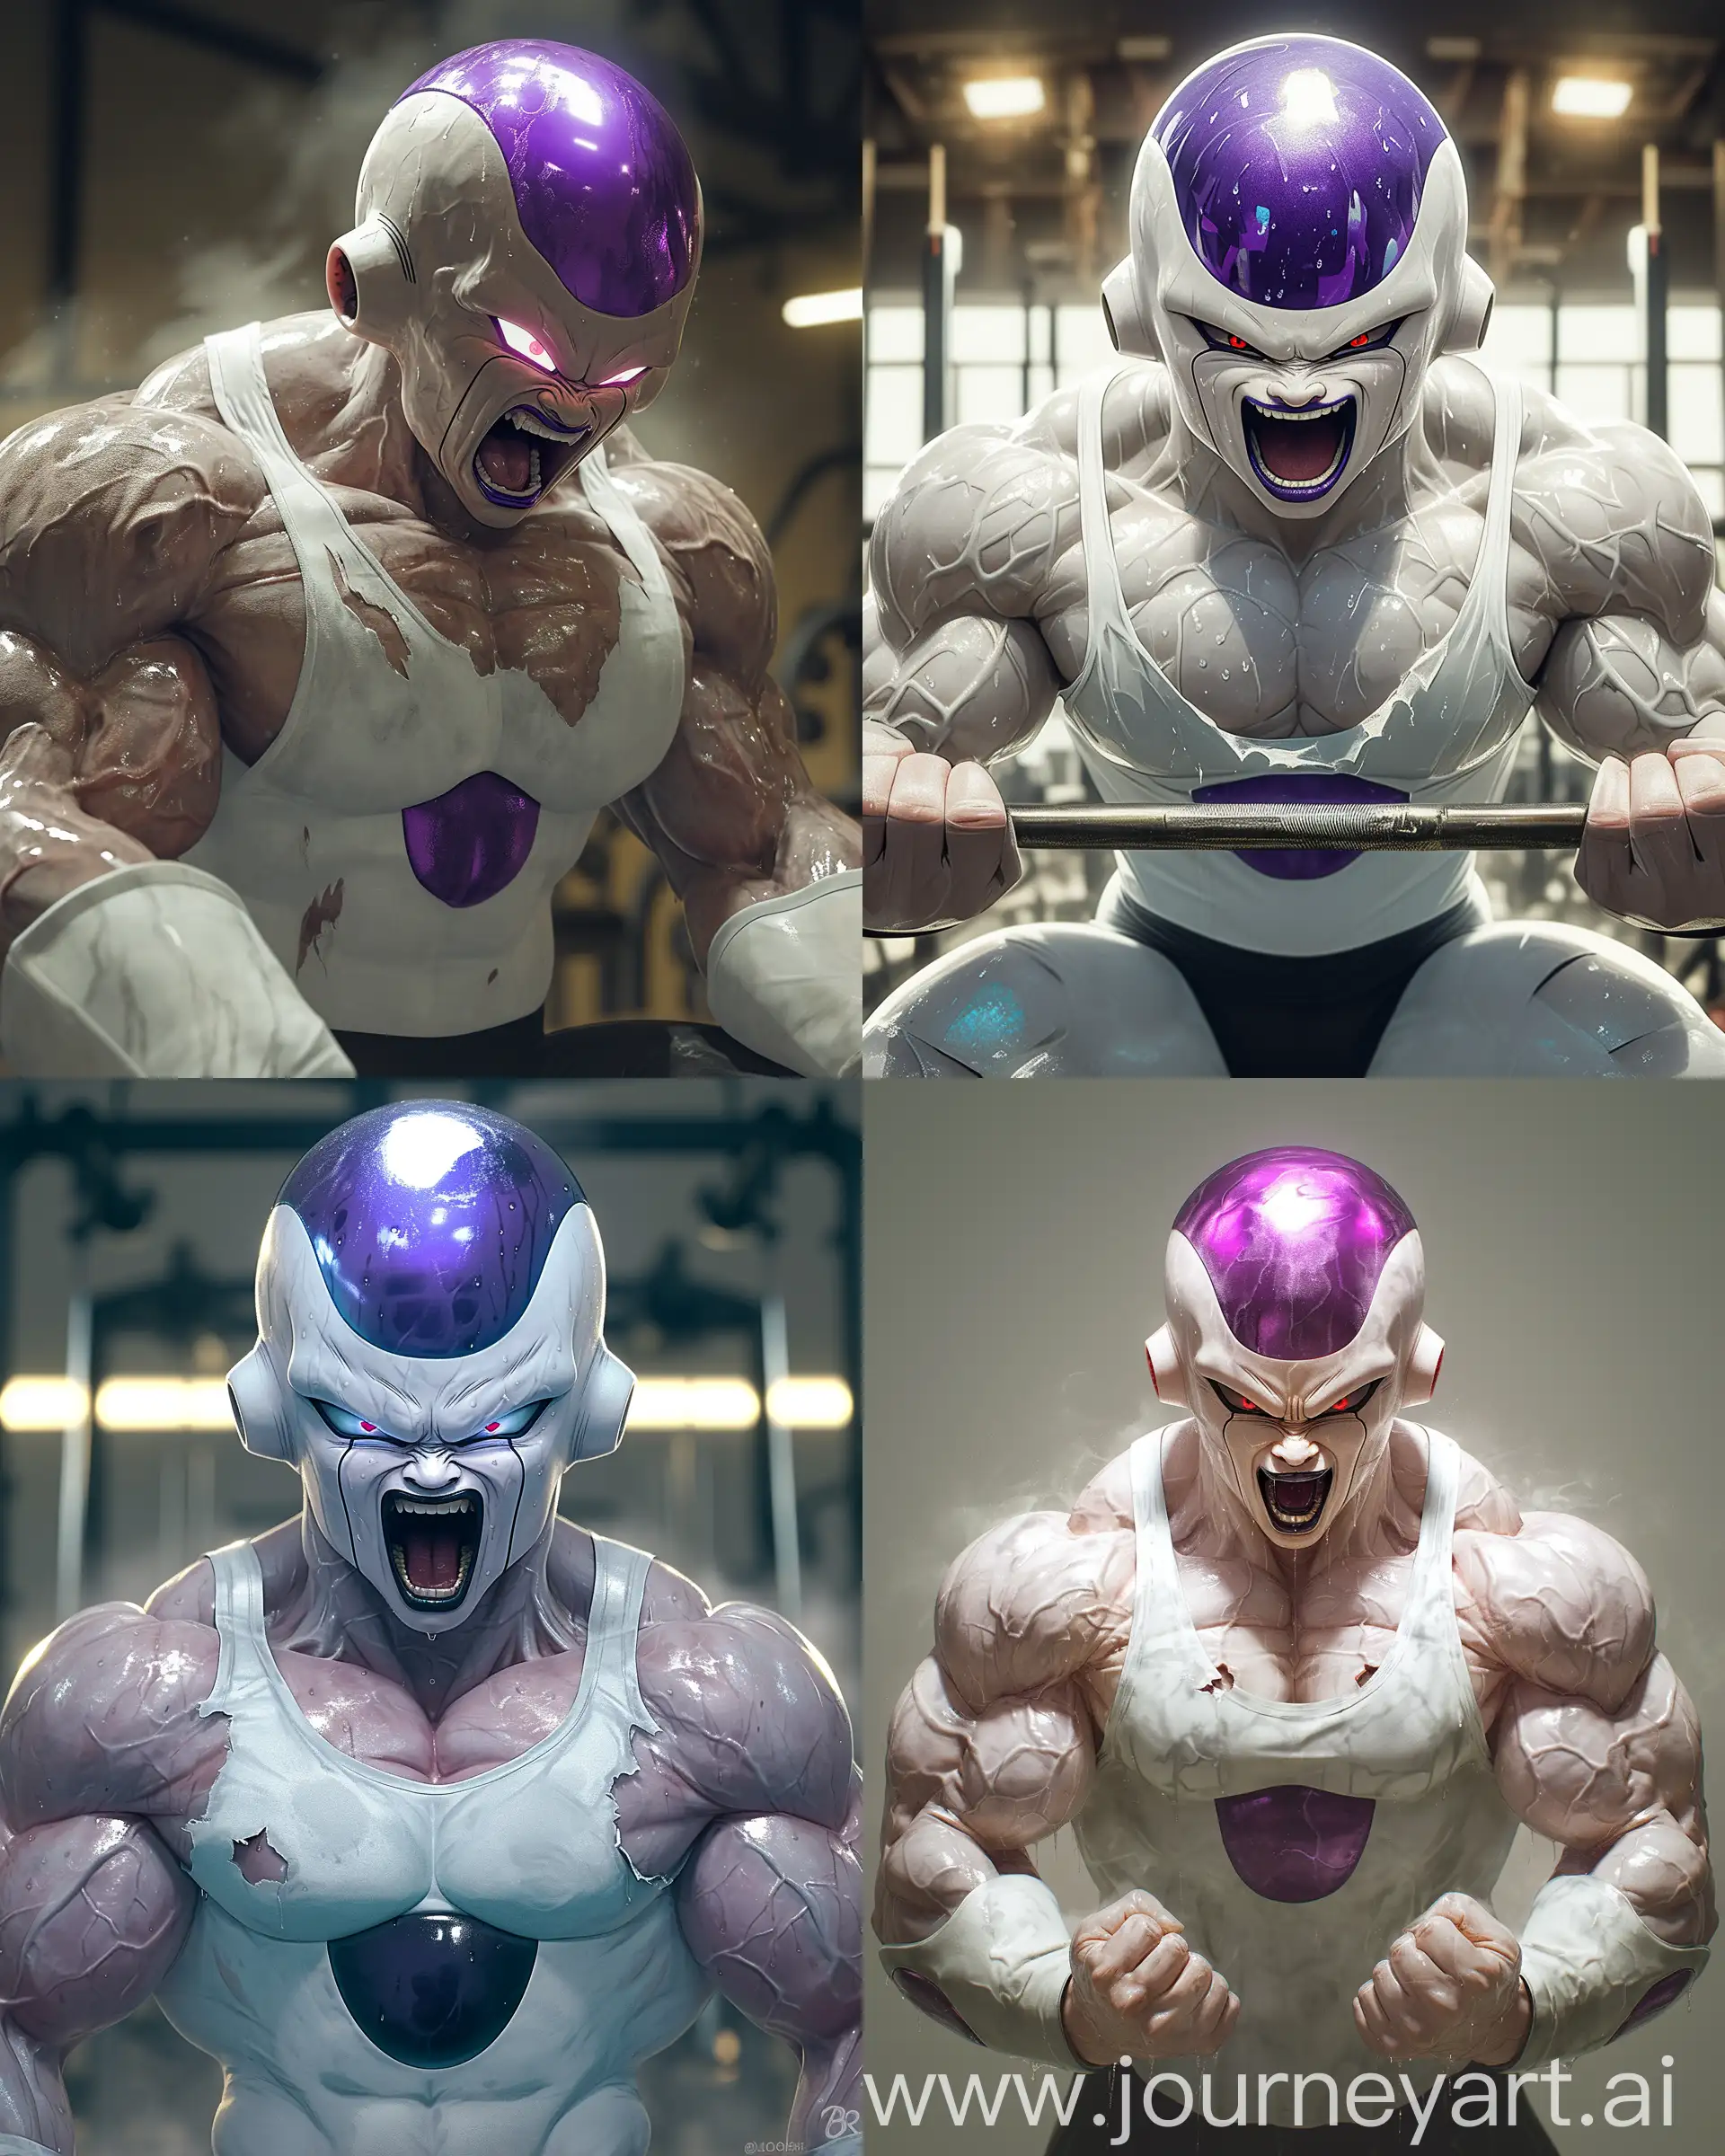 Intense-Frieza-Squat-Workout-Hyperrealistic-Dragon-Ball-Fitness-in-Luxury-Gym